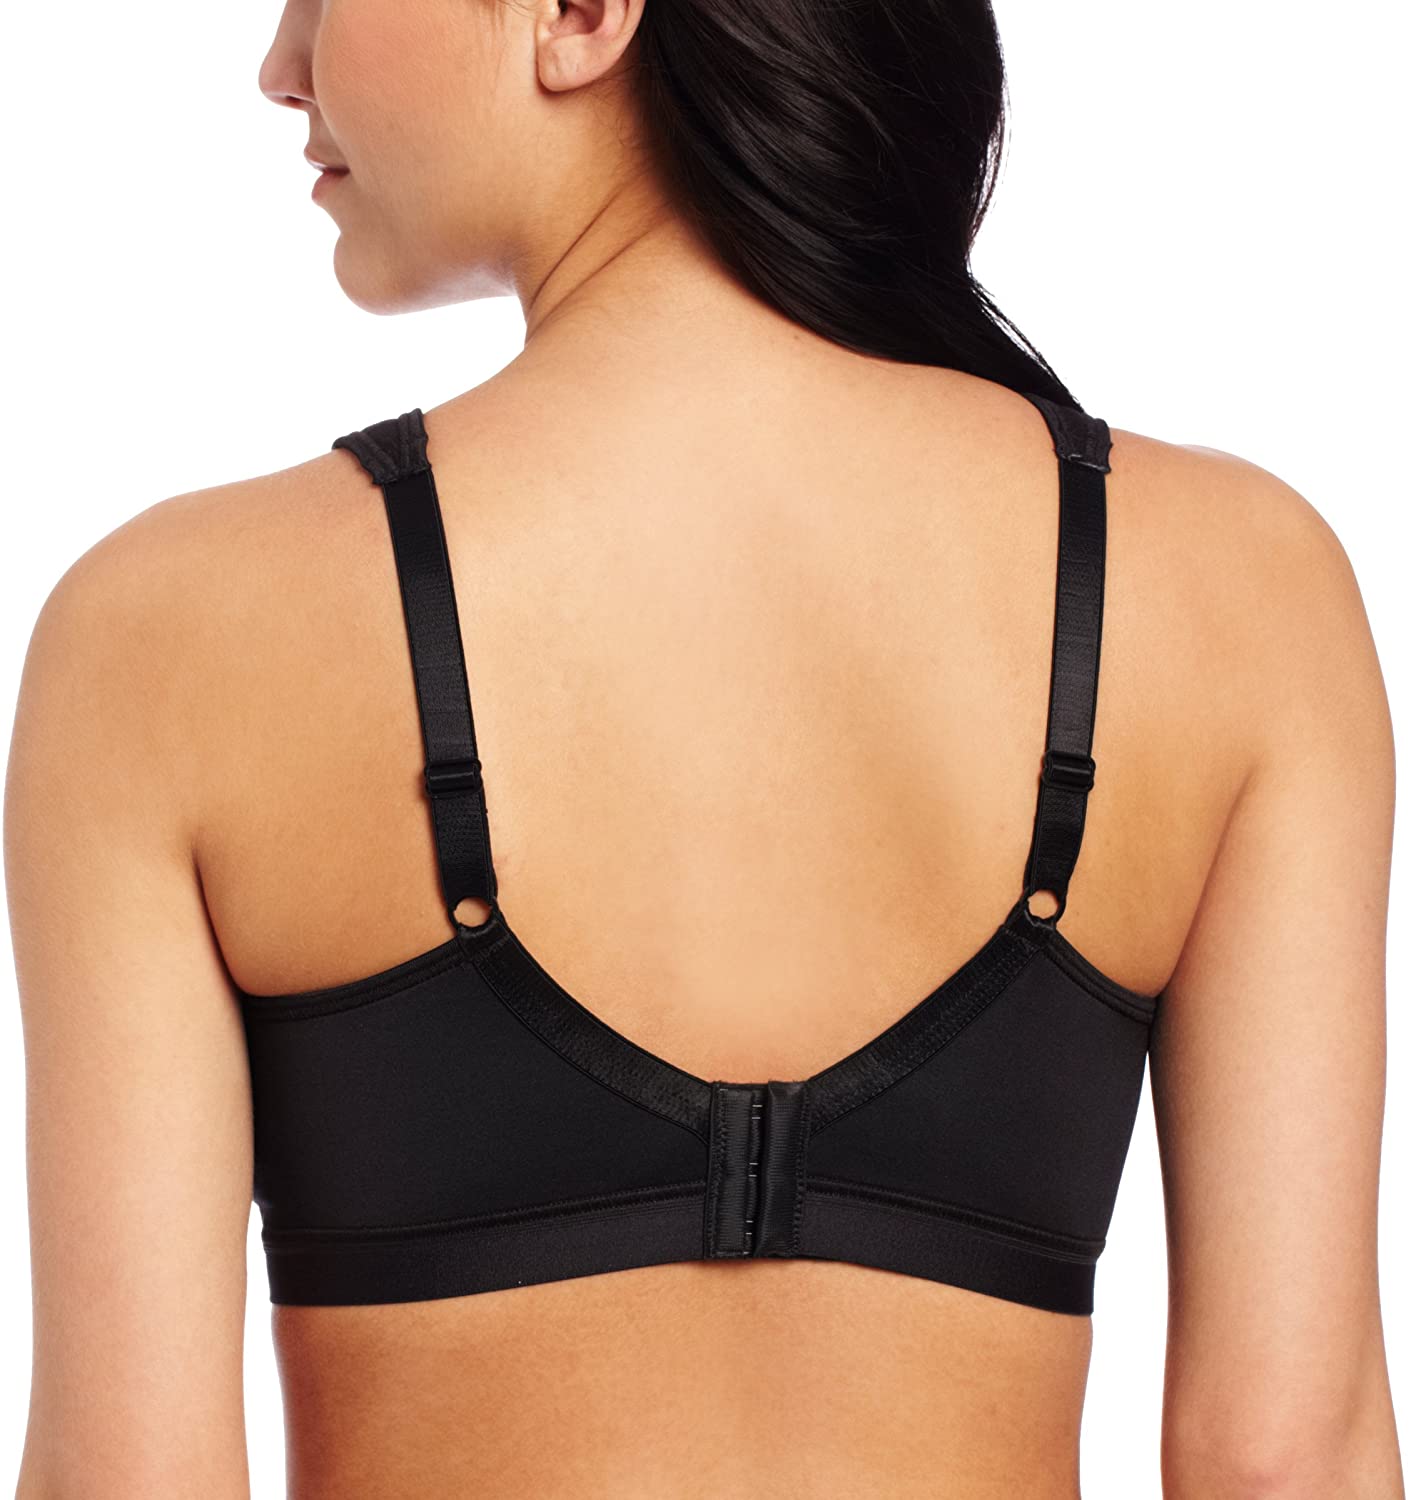  Playtex Womens 18 Hour Active Lifestyle Full Coverage Bra # 4159